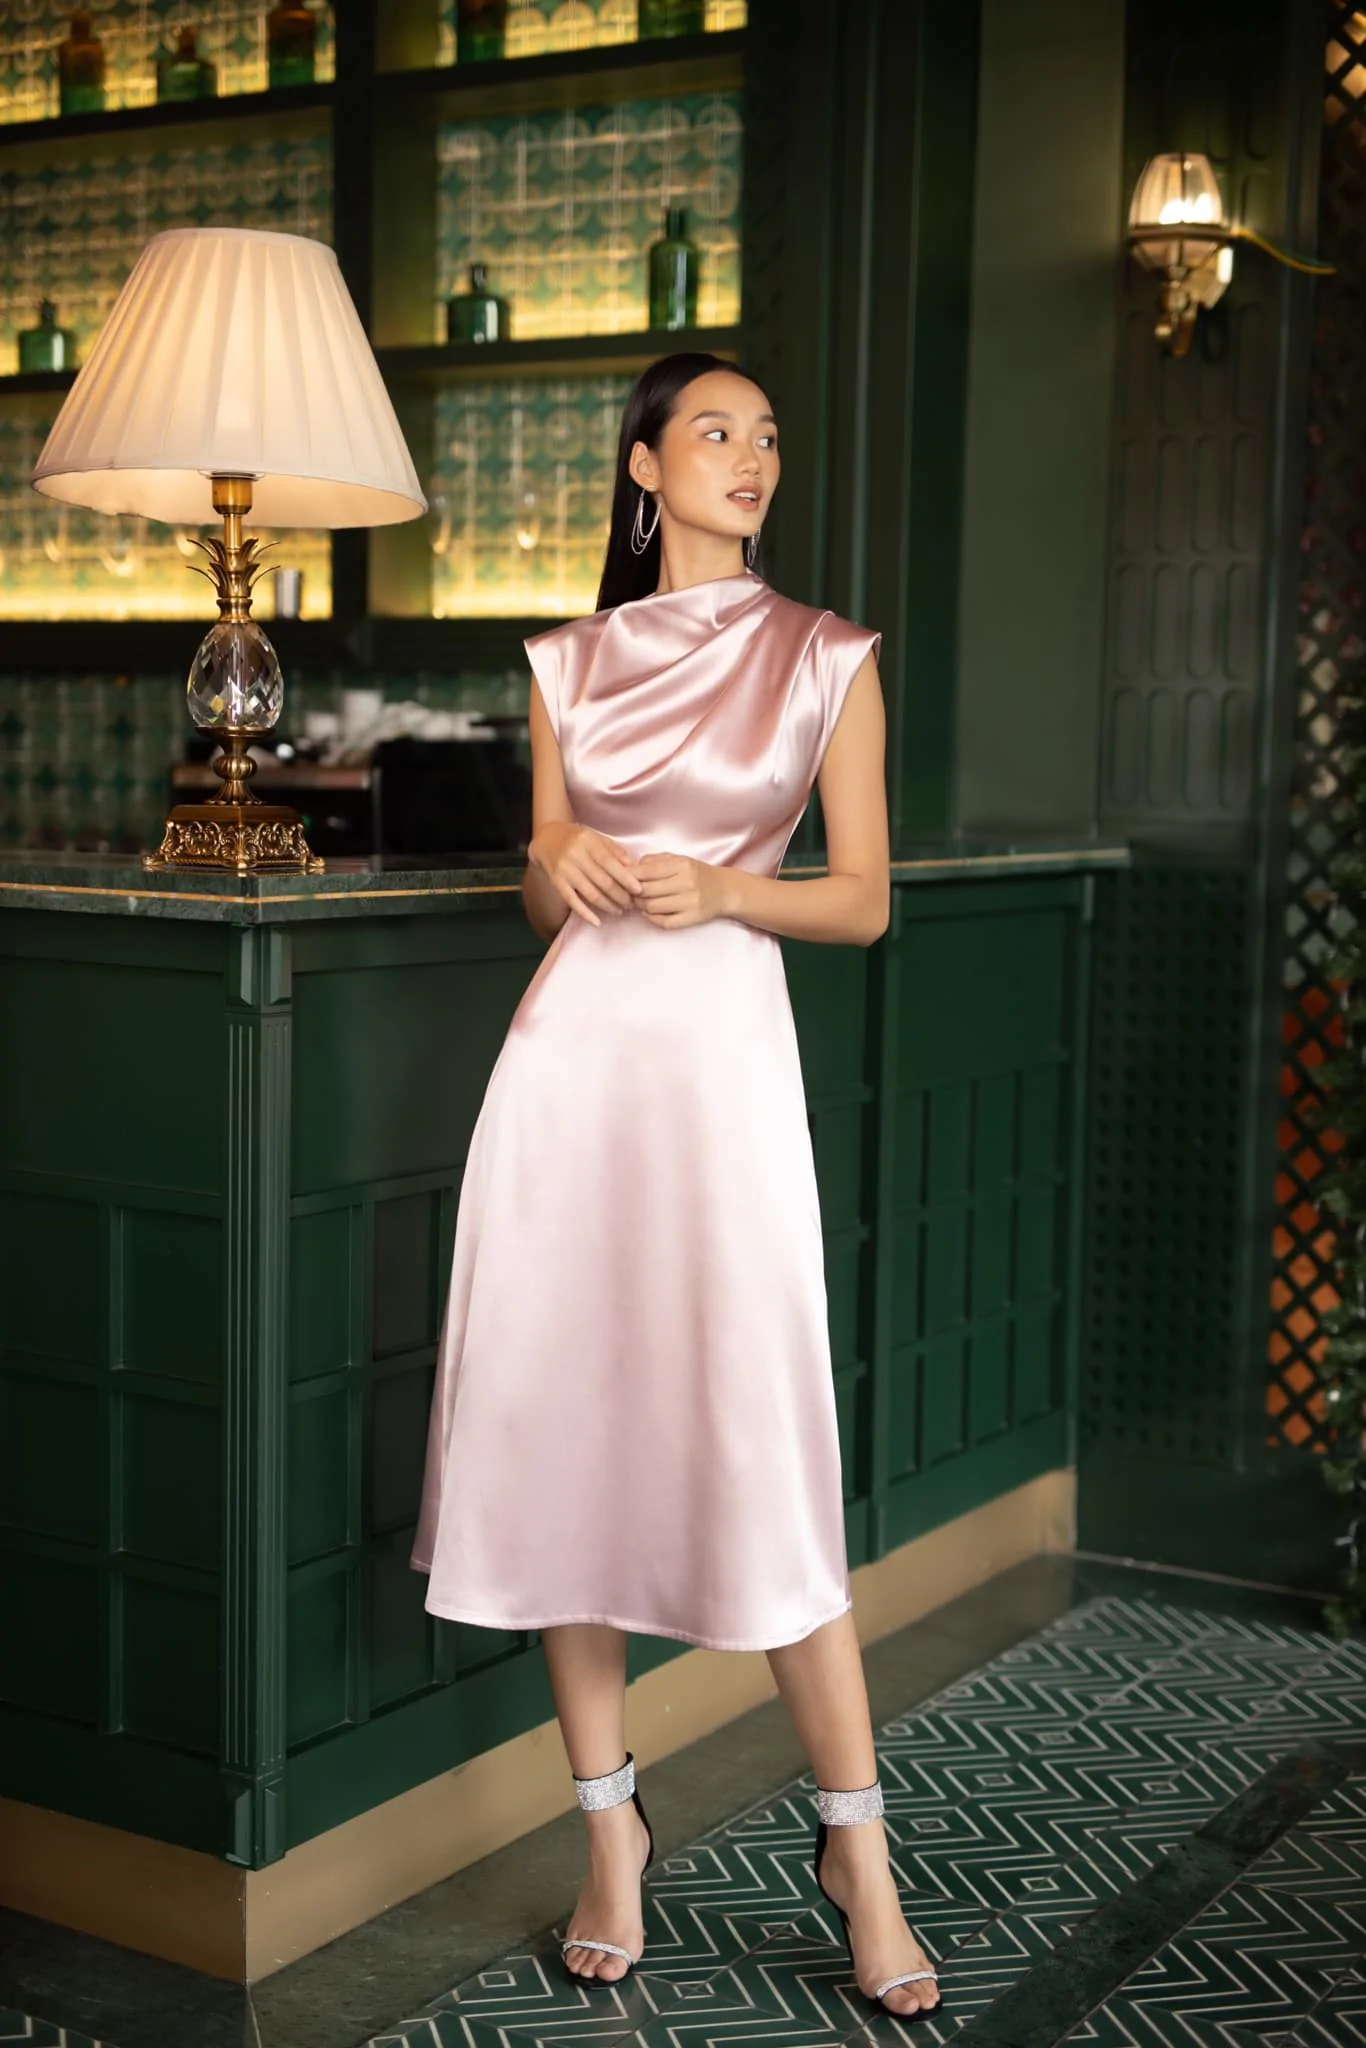 Silk Dress: Luxurious and Elegant Attire for Special Occasions